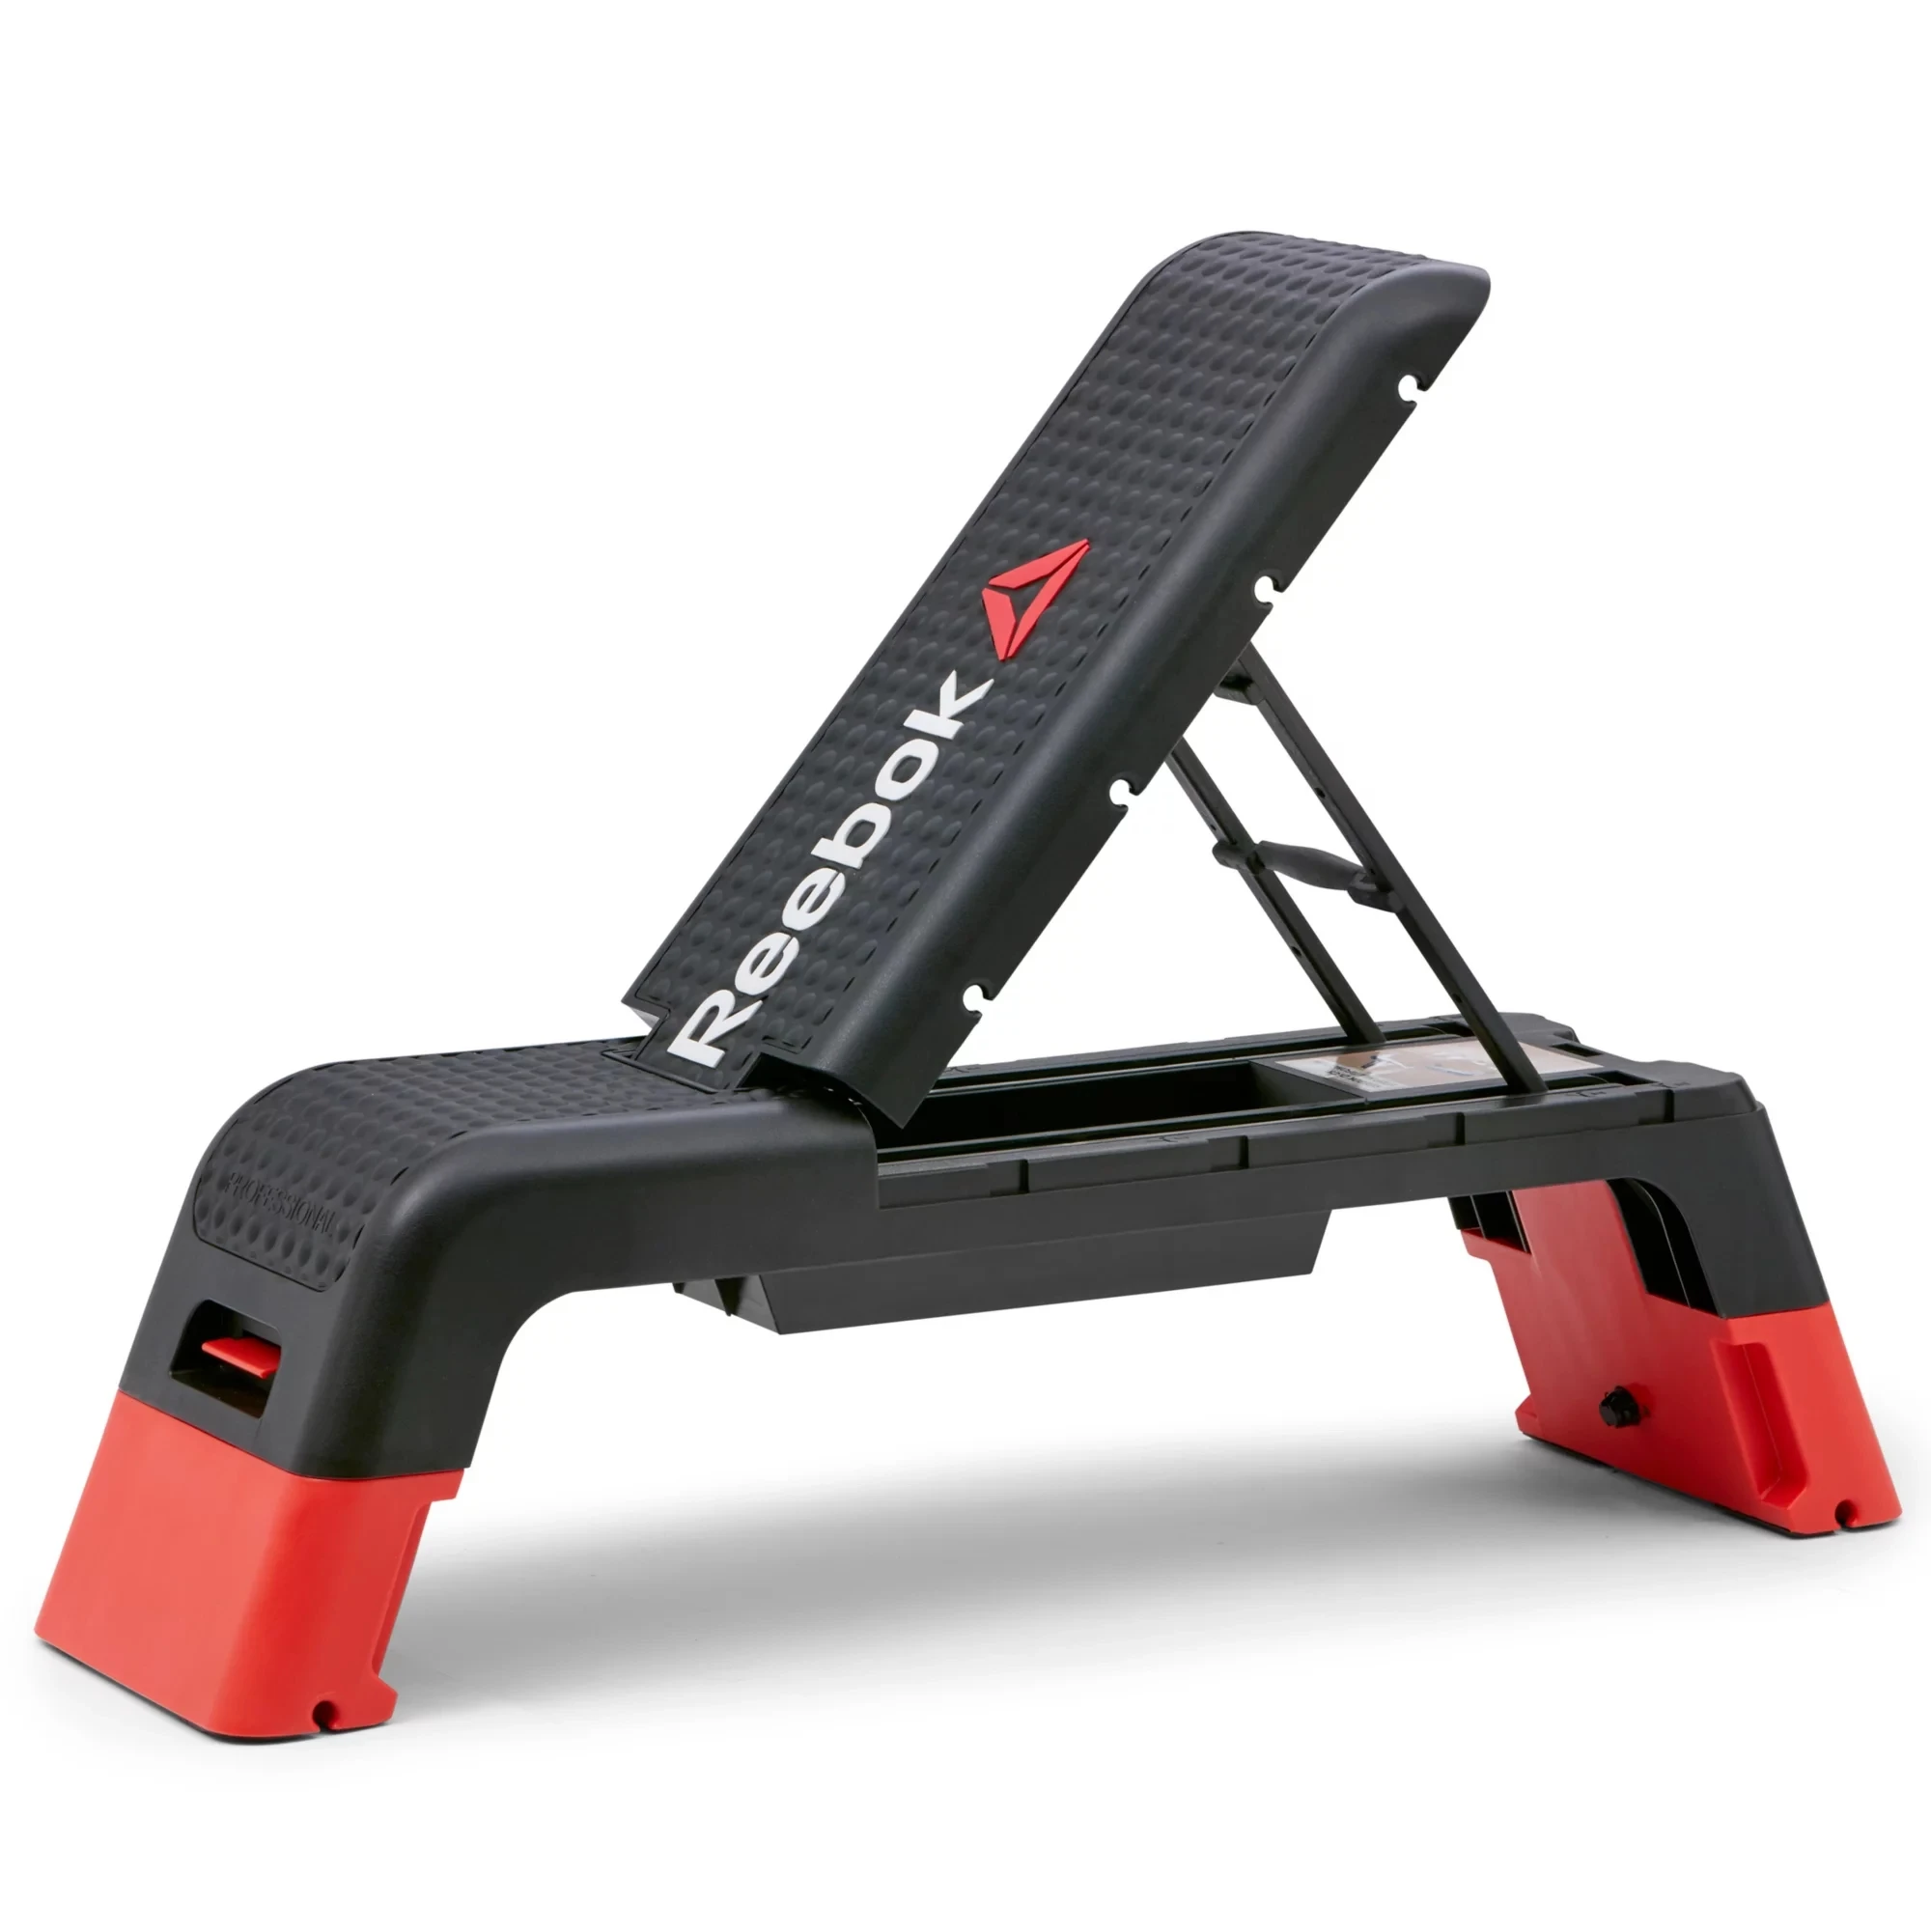 

Cheap high quality gym sports exercise fitness deck bench aerobic stepper Reebok Deck, Red